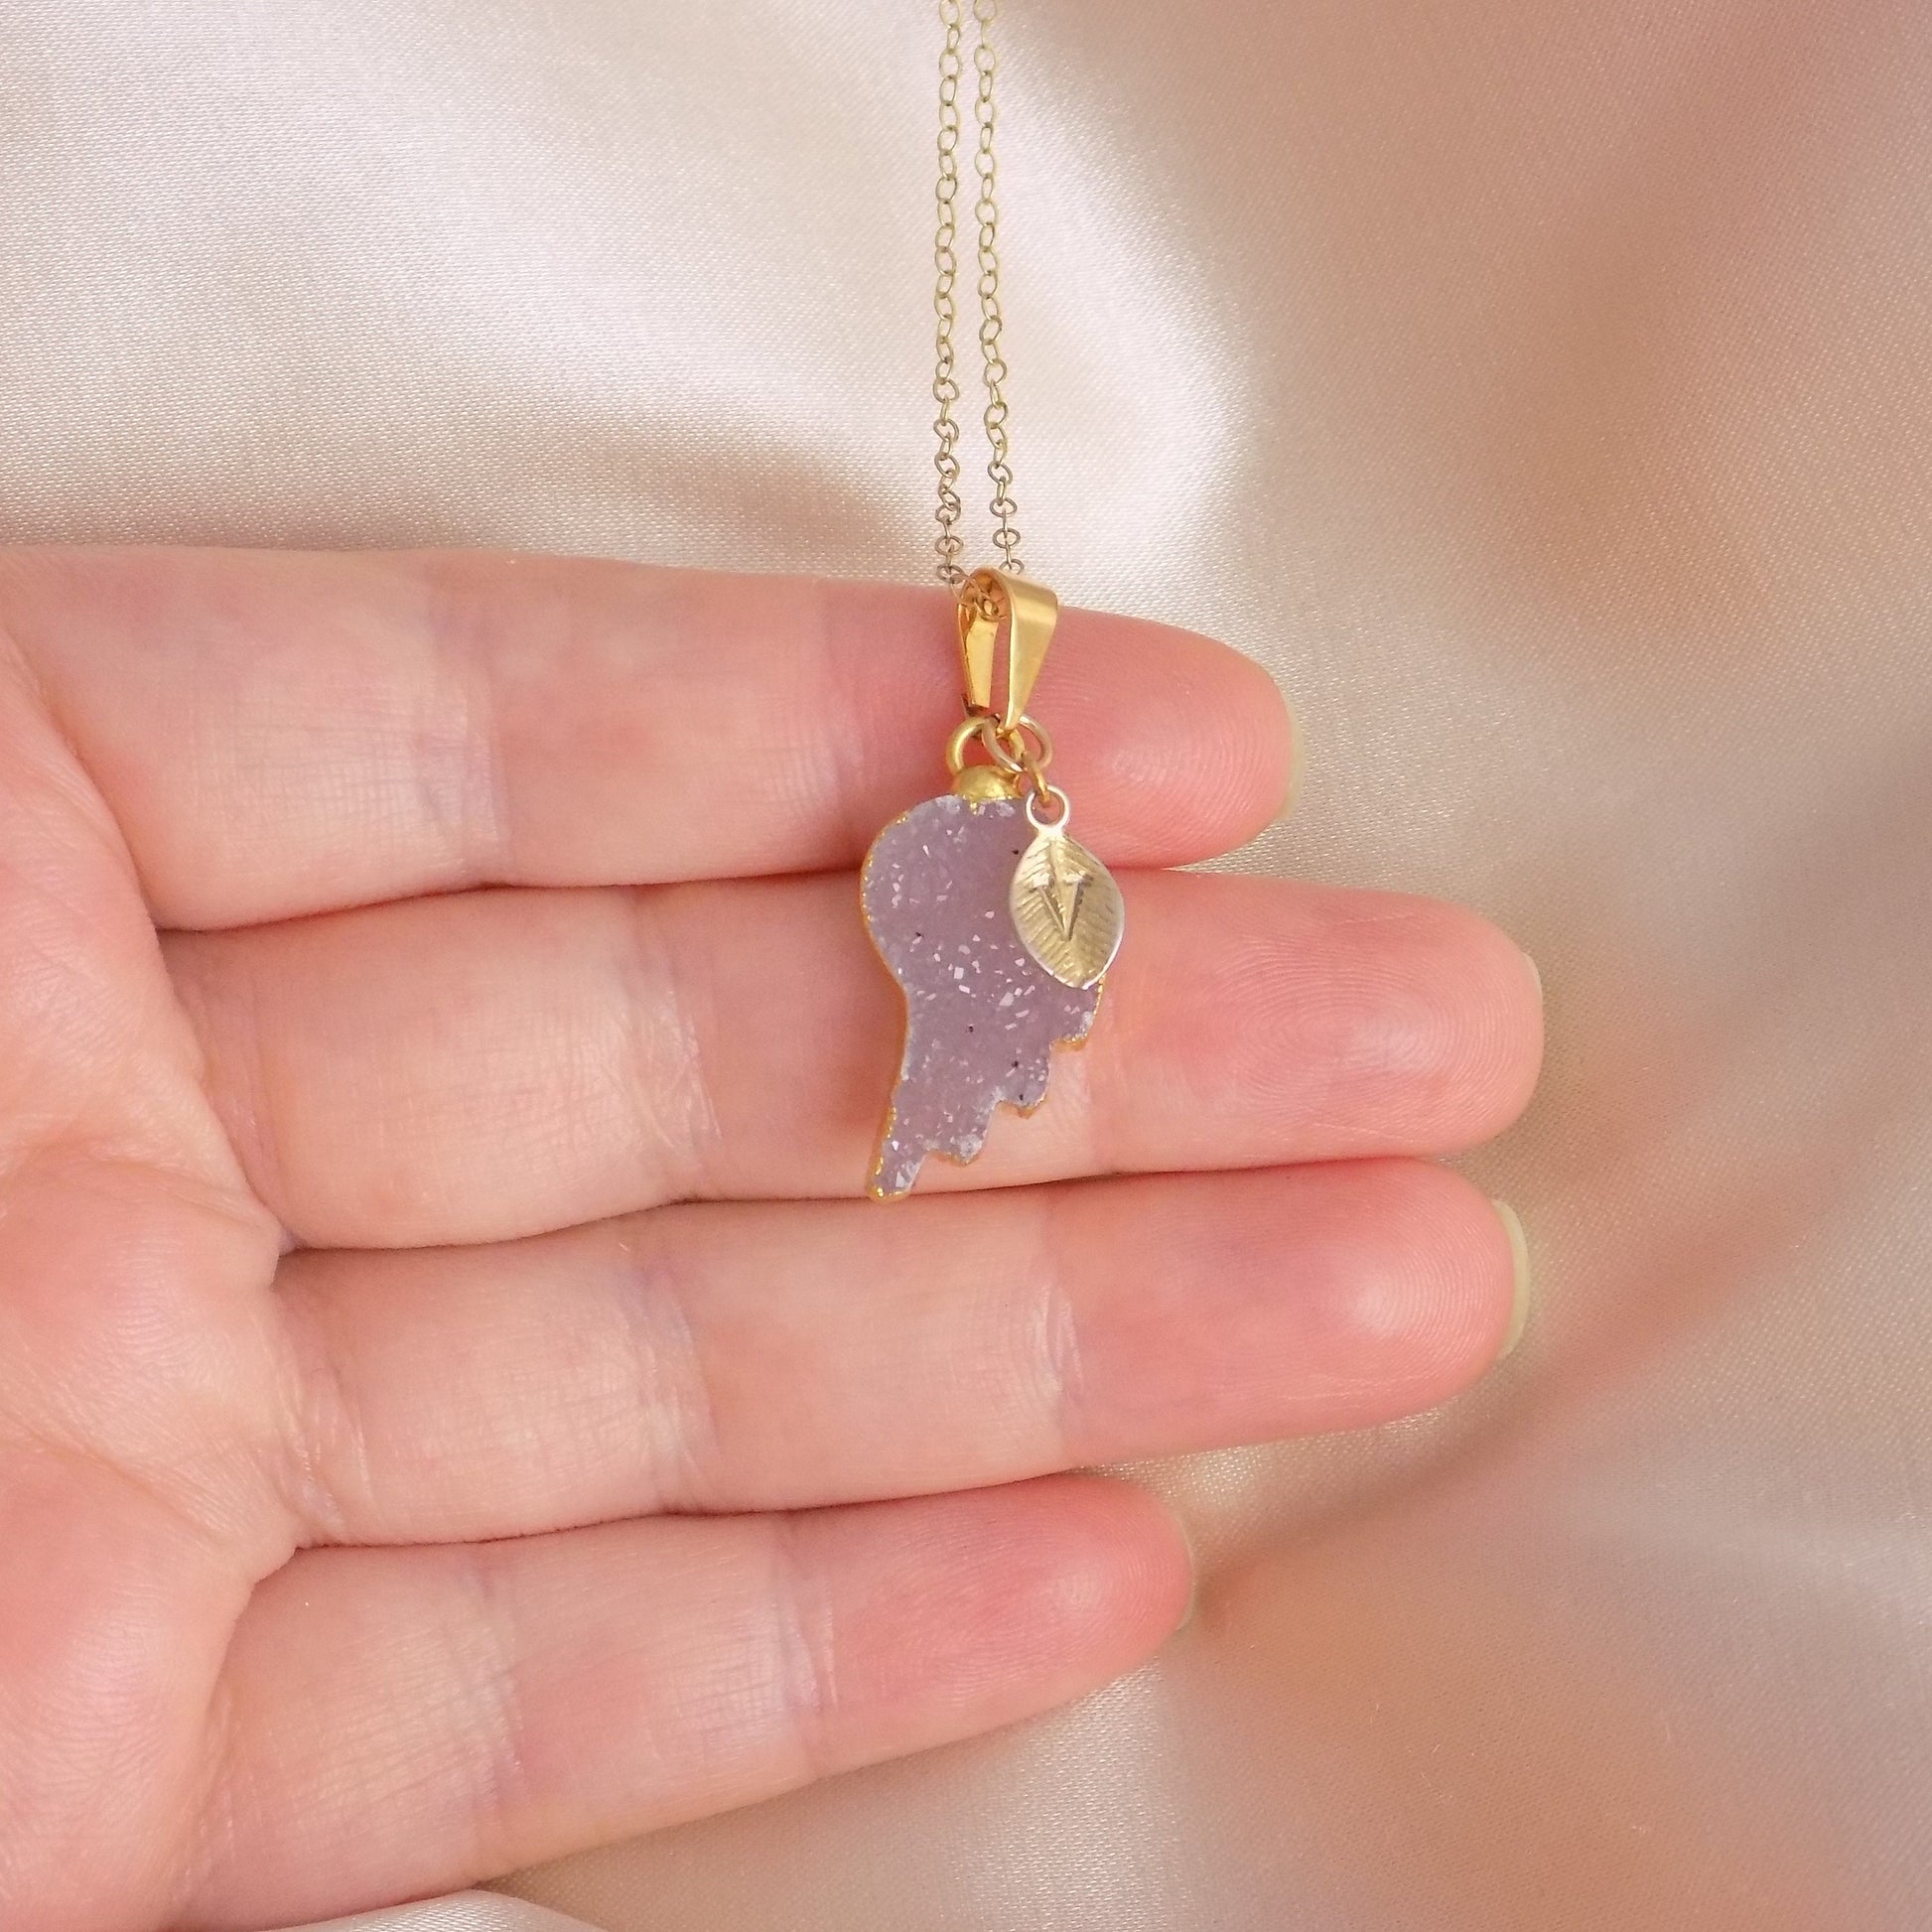 Personalized Angel Wing Necklace Gold - Natural Druzy Pendant - Christmas Gifts For Her - M7-129